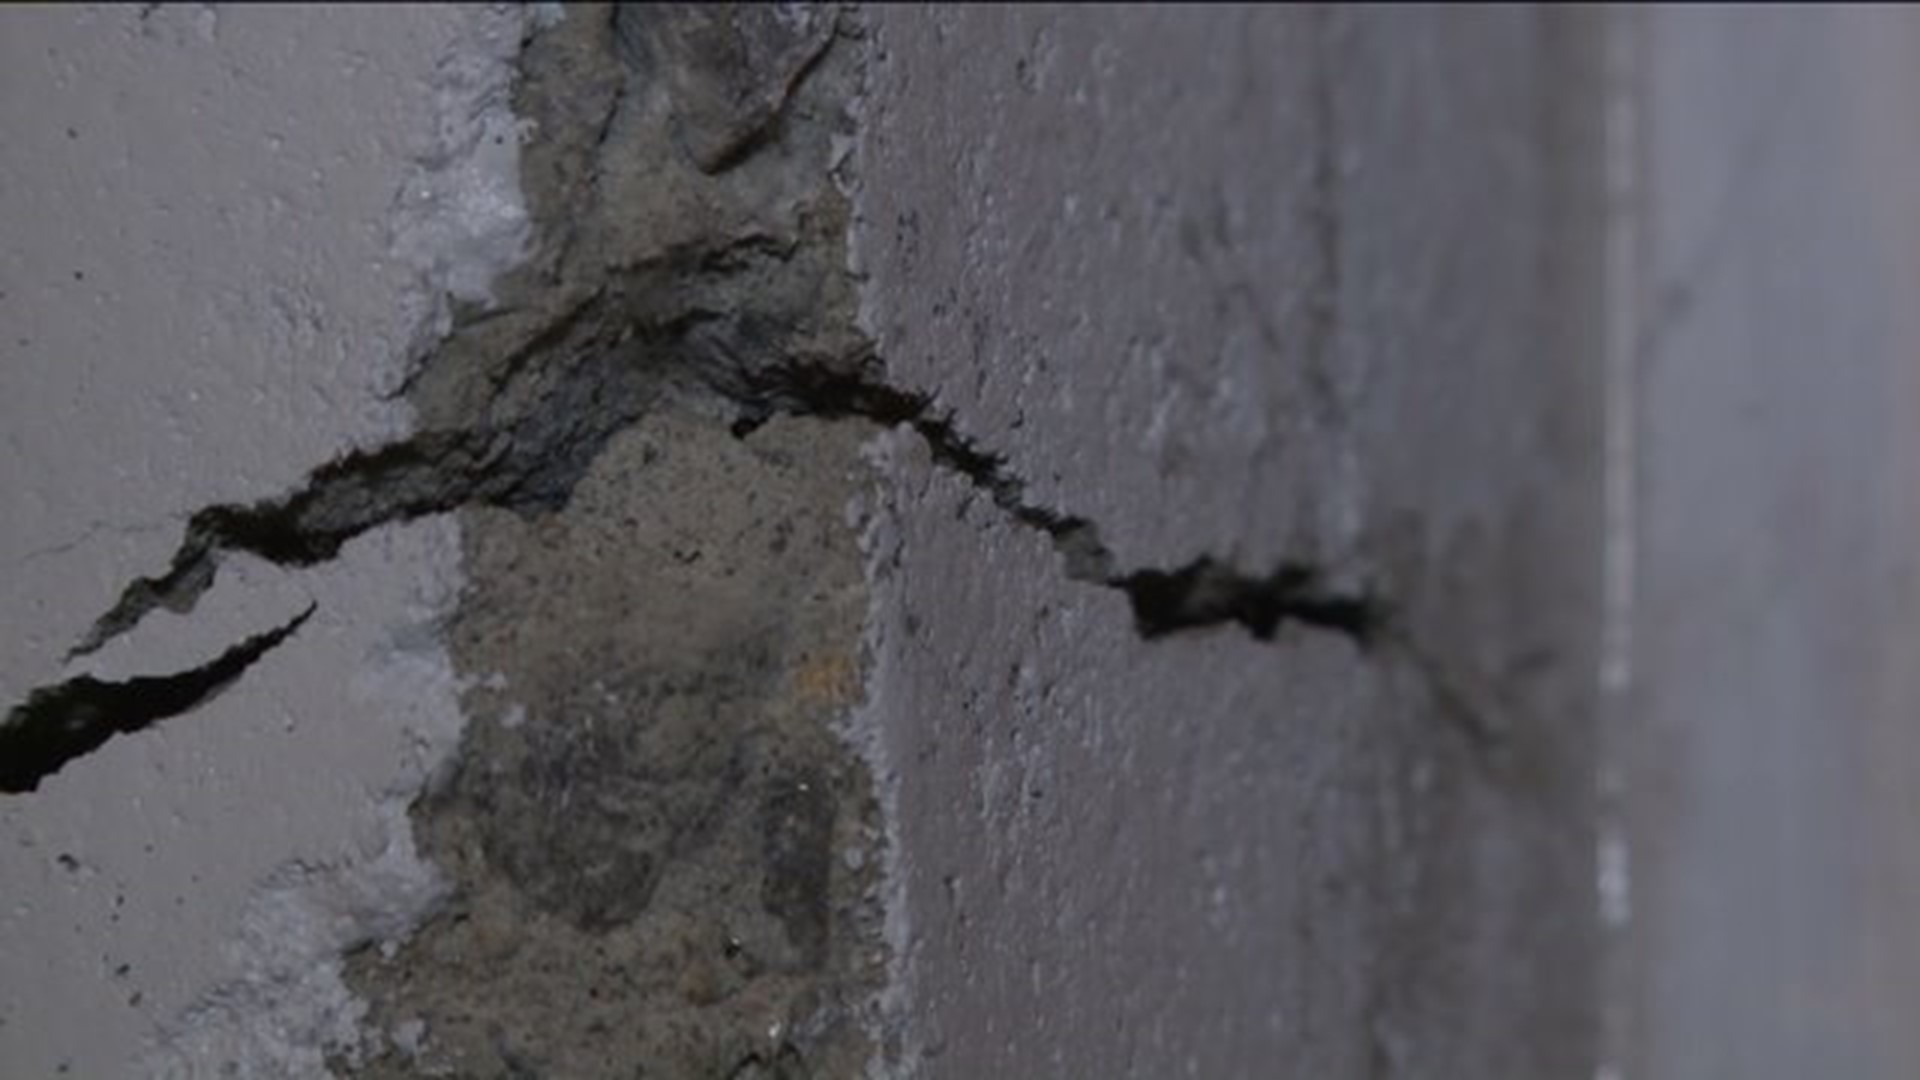 Crumbling foundations cause concern for homeowners